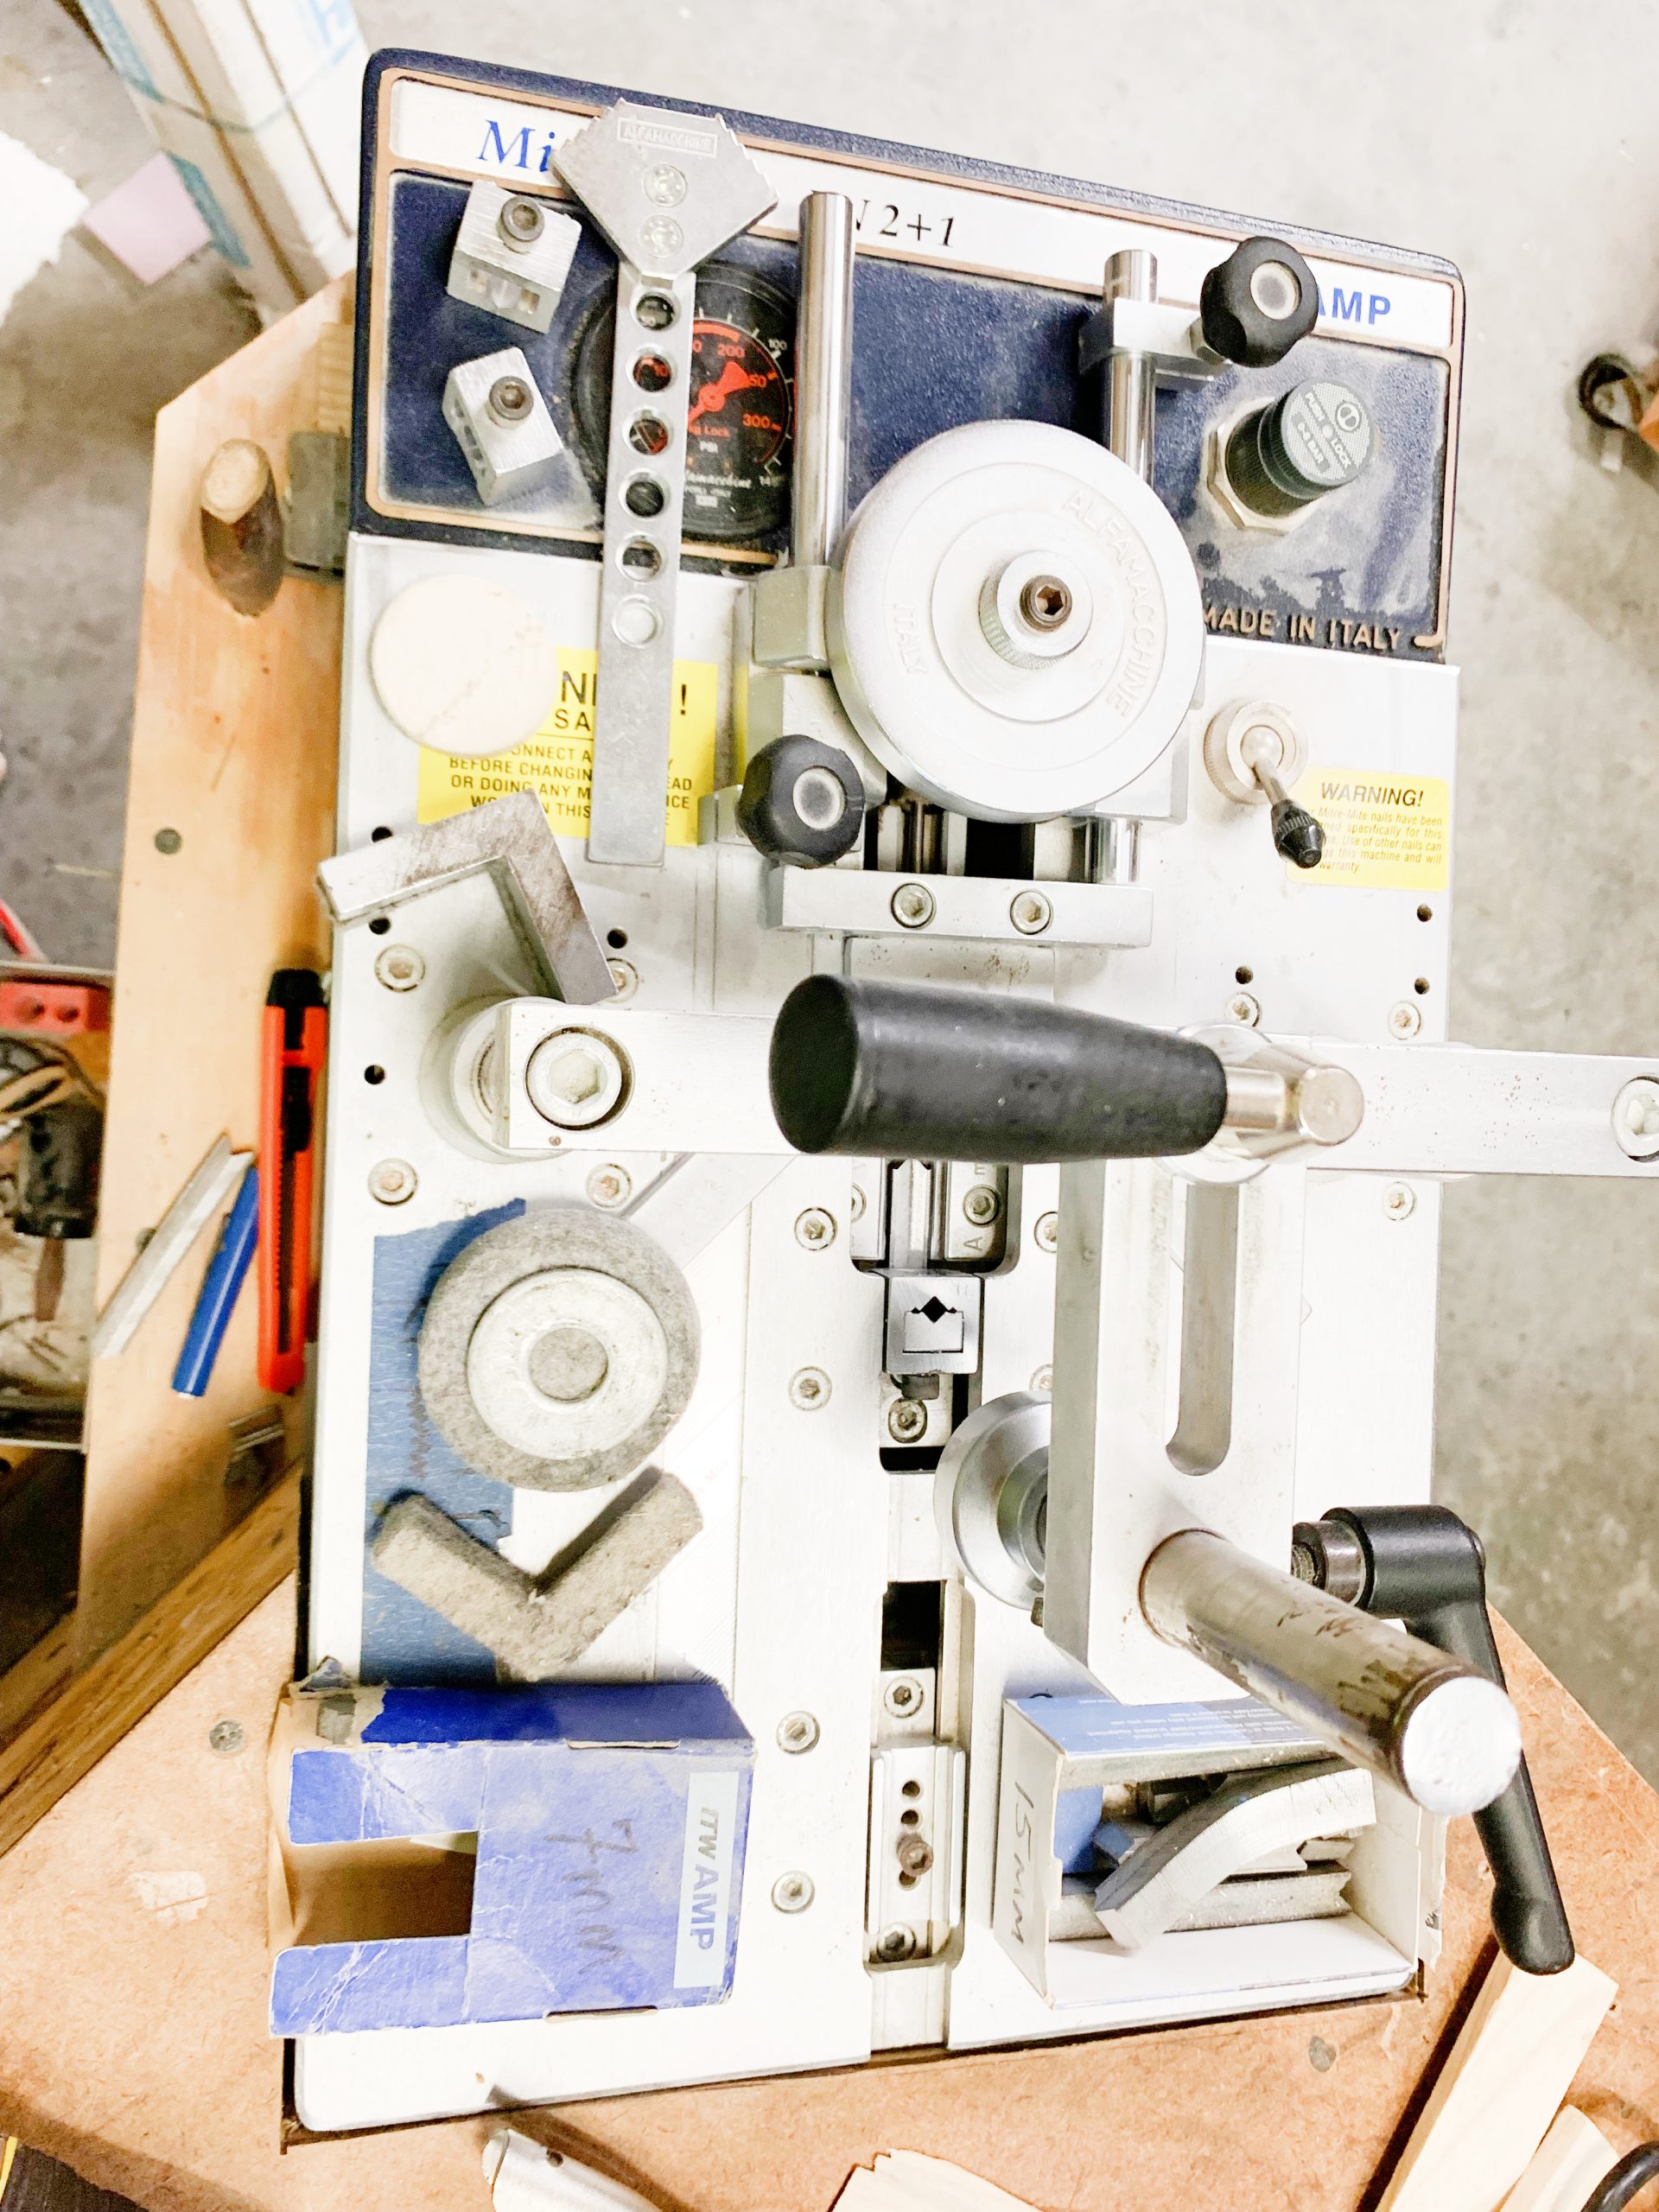 Equipment Lot: Cassese CS999 Double Miter Saw, ITW AMP VN2+1 Vnailer & Vertical Moulding Racks (Used) Item # UE-041922A (Louisiana)